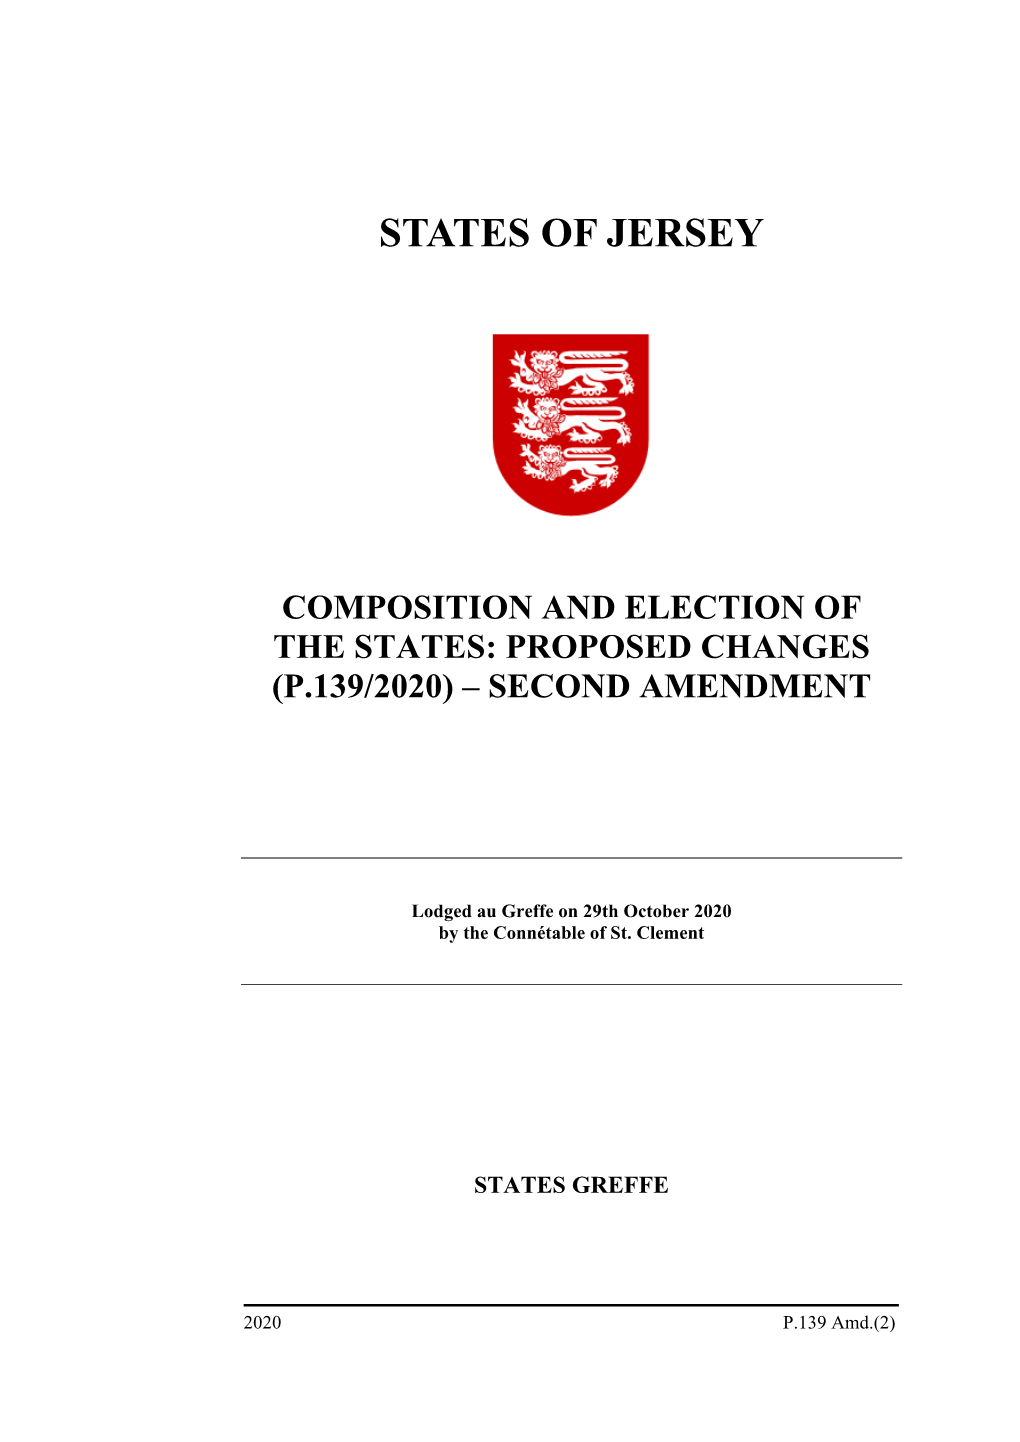 Composition and Election of the States: Proposed Changes (P.139/2020) – Second Amendment